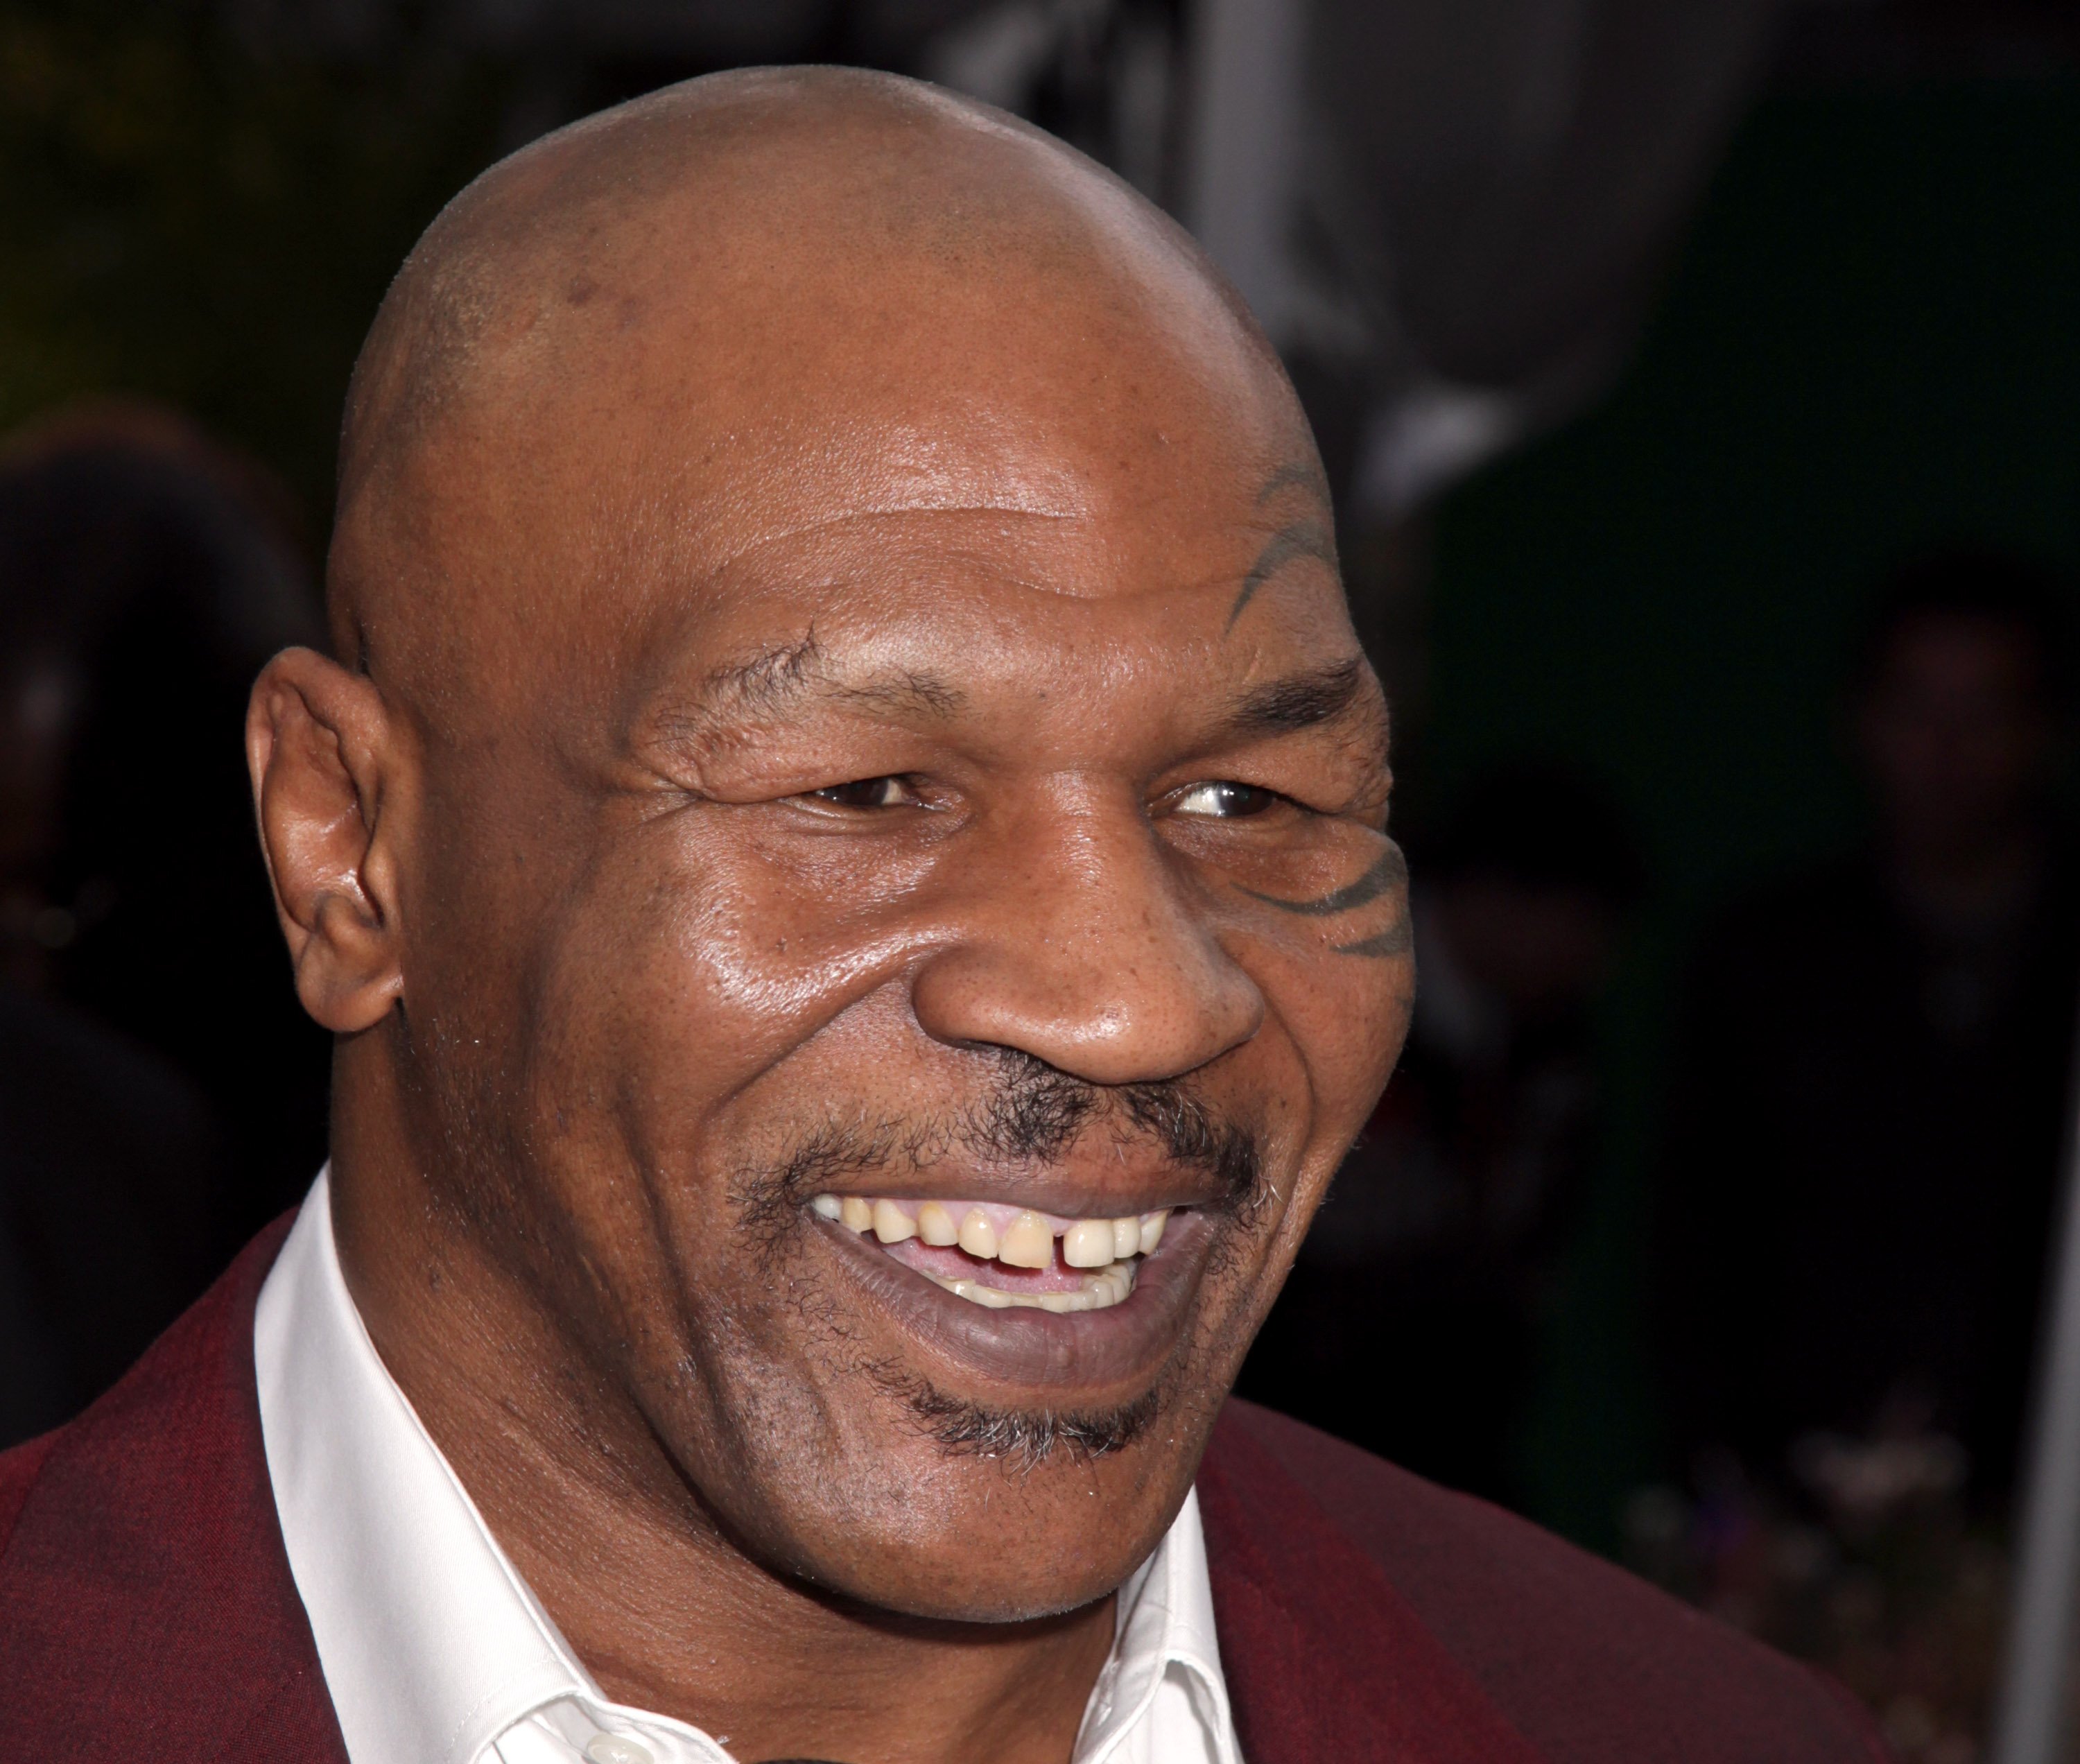 Mike Tyson attending the 15th Annual Academy Awards Viewing Party Benefiting Children Uniting Nations in Beverly Hills | Source: Getty Images